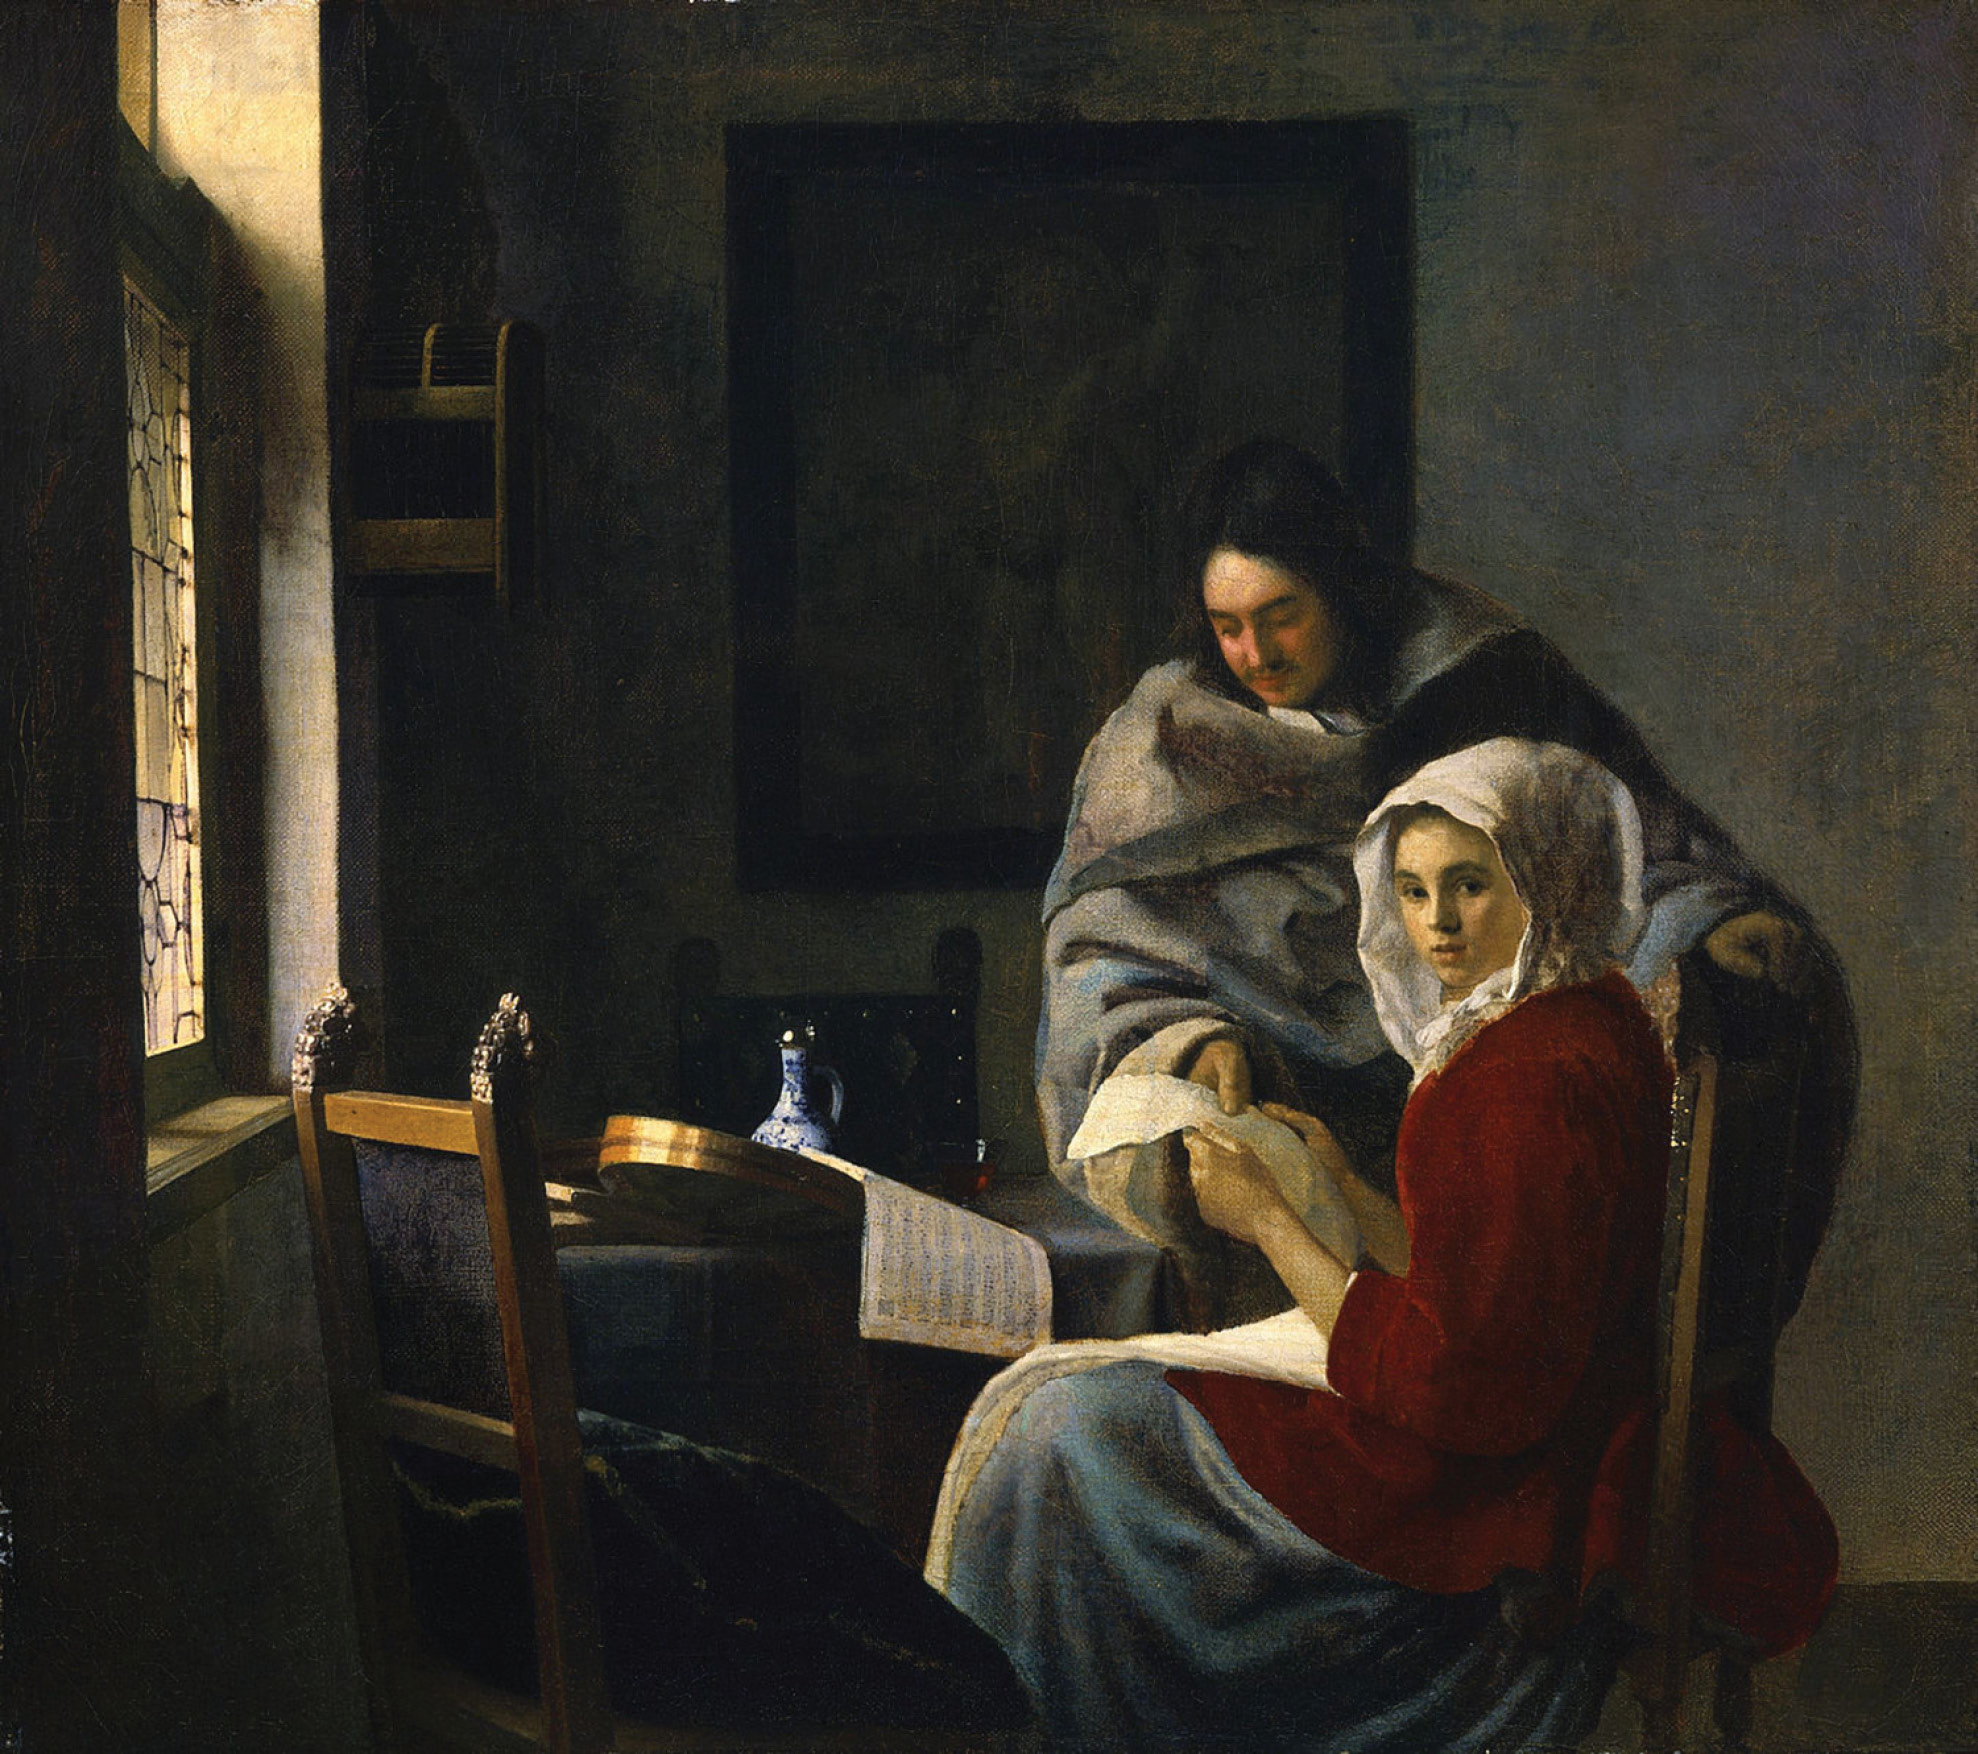 Johannes Vermeer. Girl Interrupted at Her Music, ca. 1658-59. The Frick Collection.